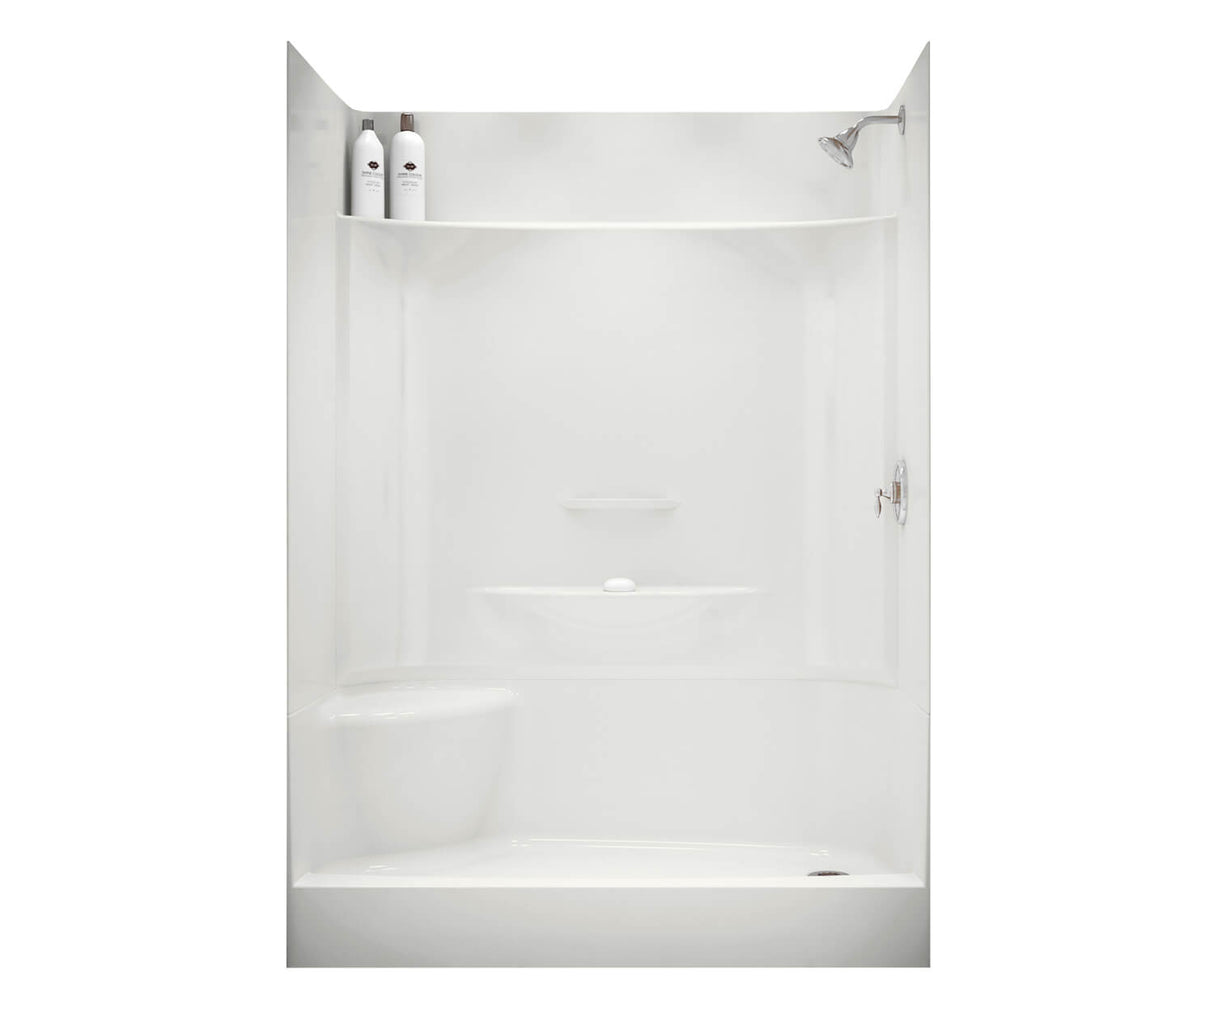 MAAX 145036-000-002-095 KDS 3060 AcrylX Alcove Left-Hand Drain Four-Piece Shower in White